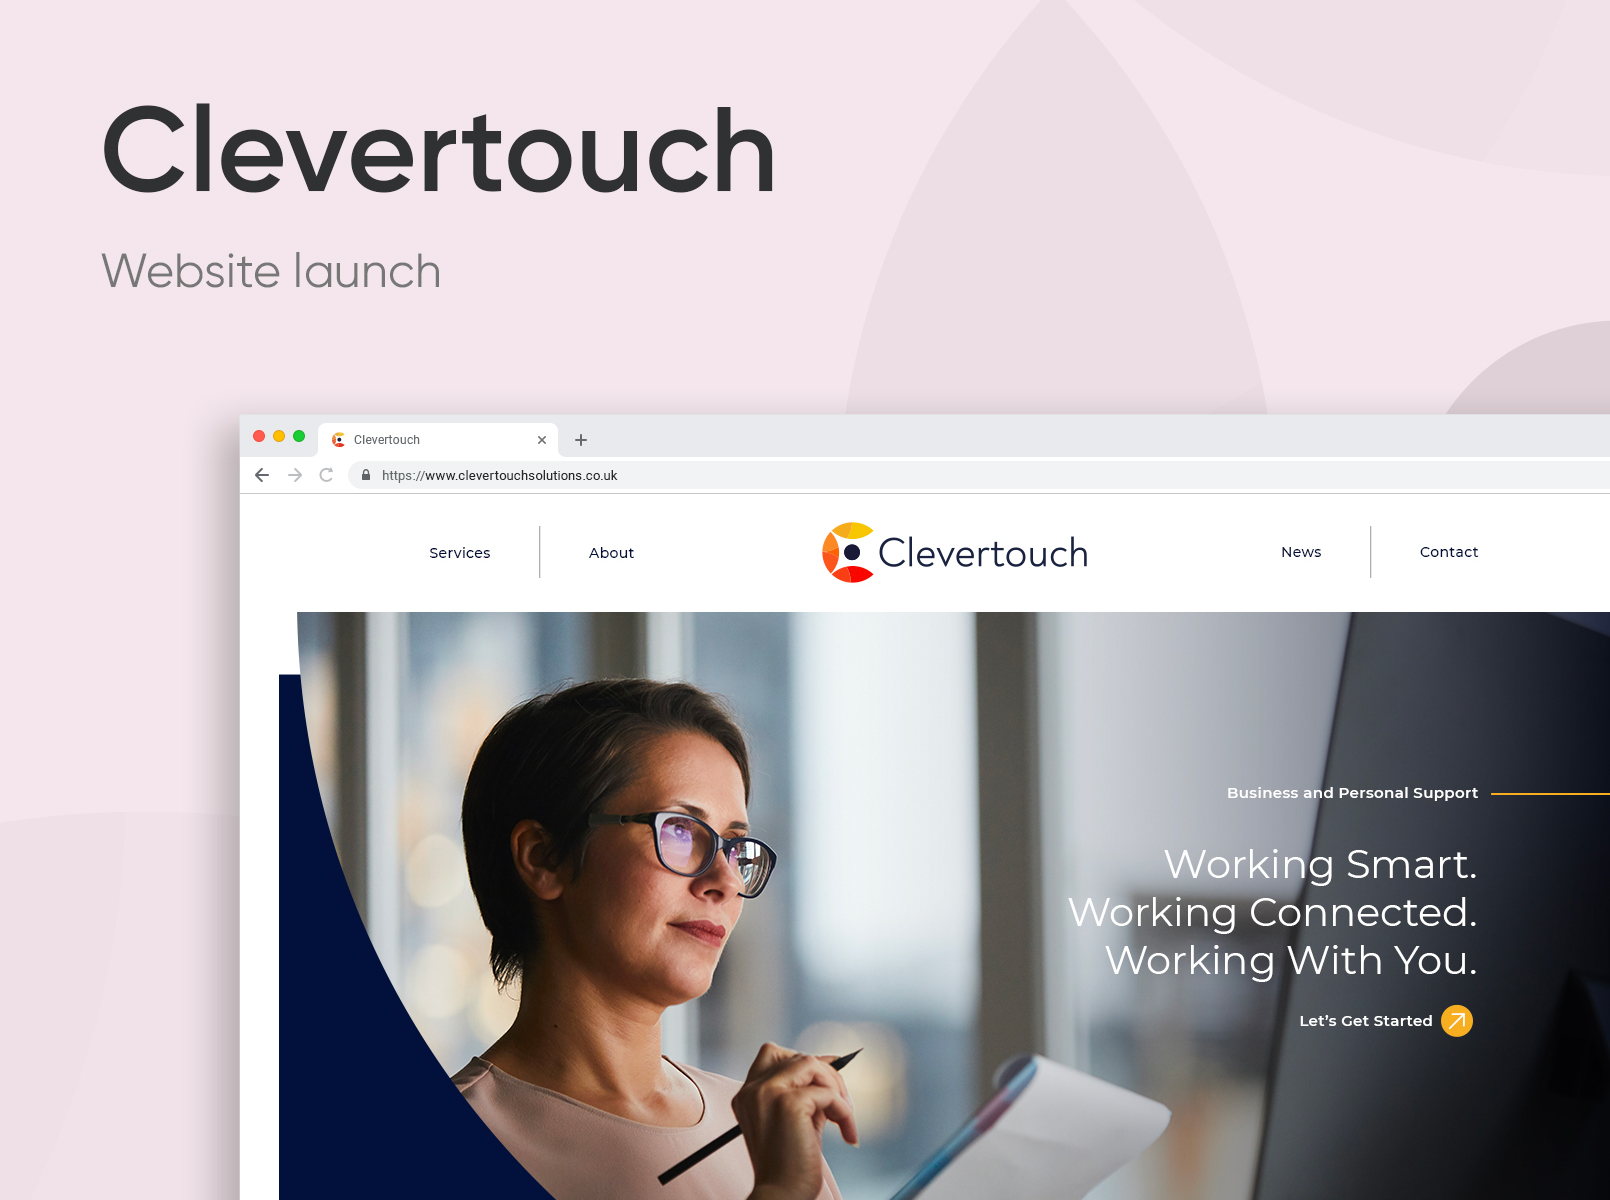 New brand identity and website unveiled for Clevertouch